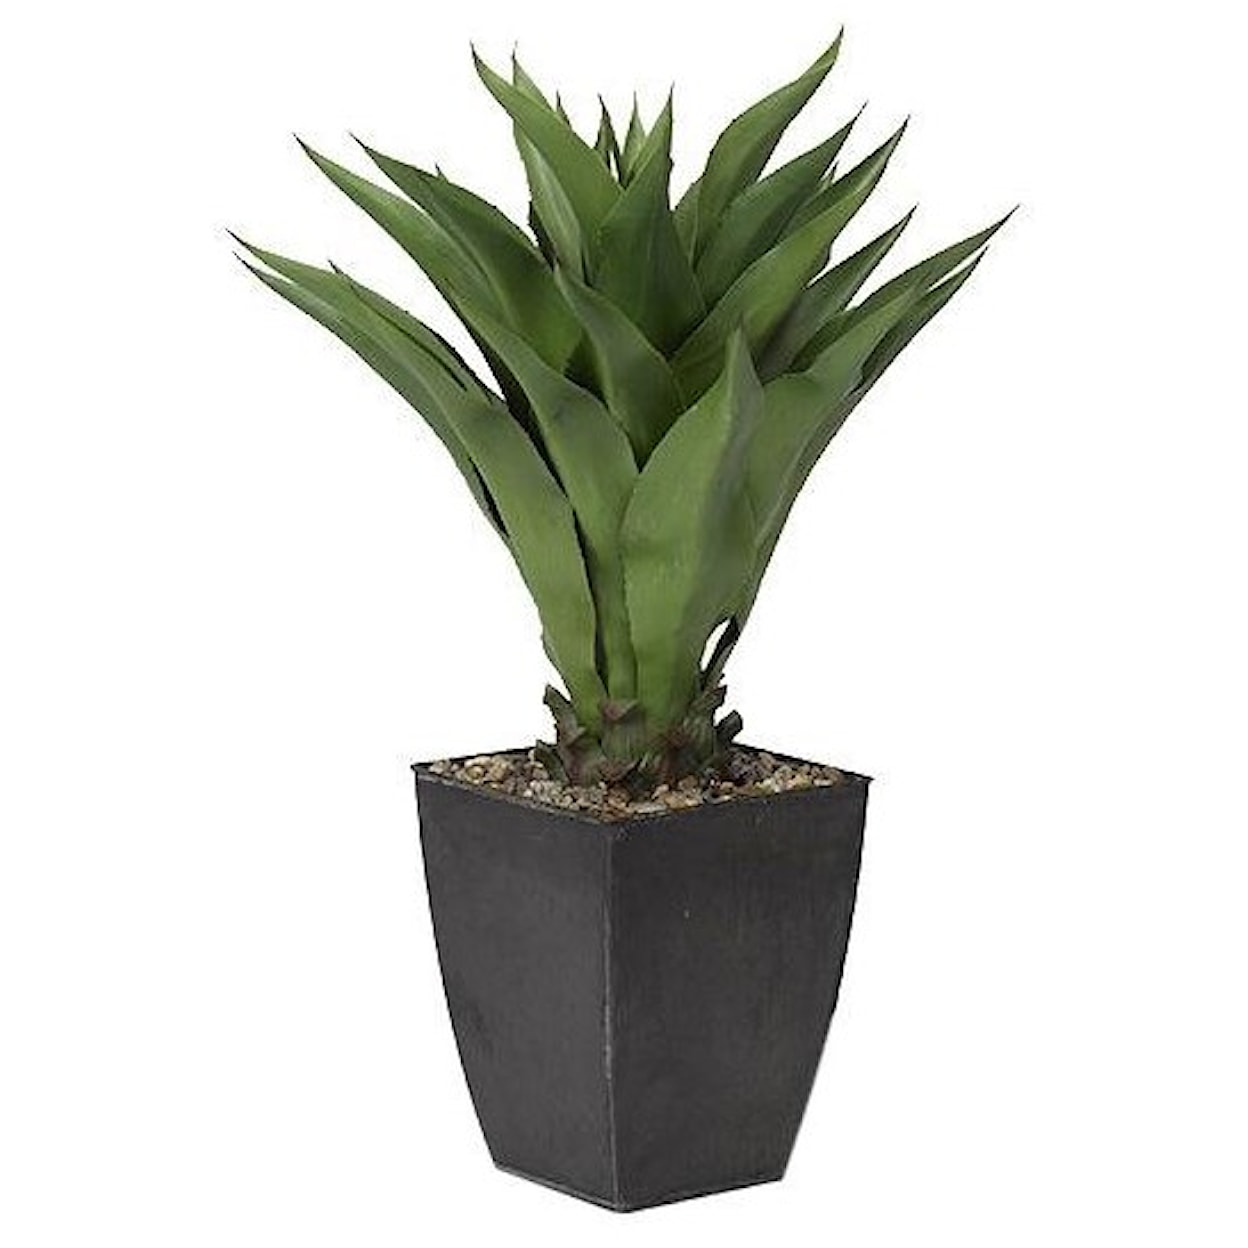 D&W Silks Artificial Trees Sisal Plant in Square Metal Planter